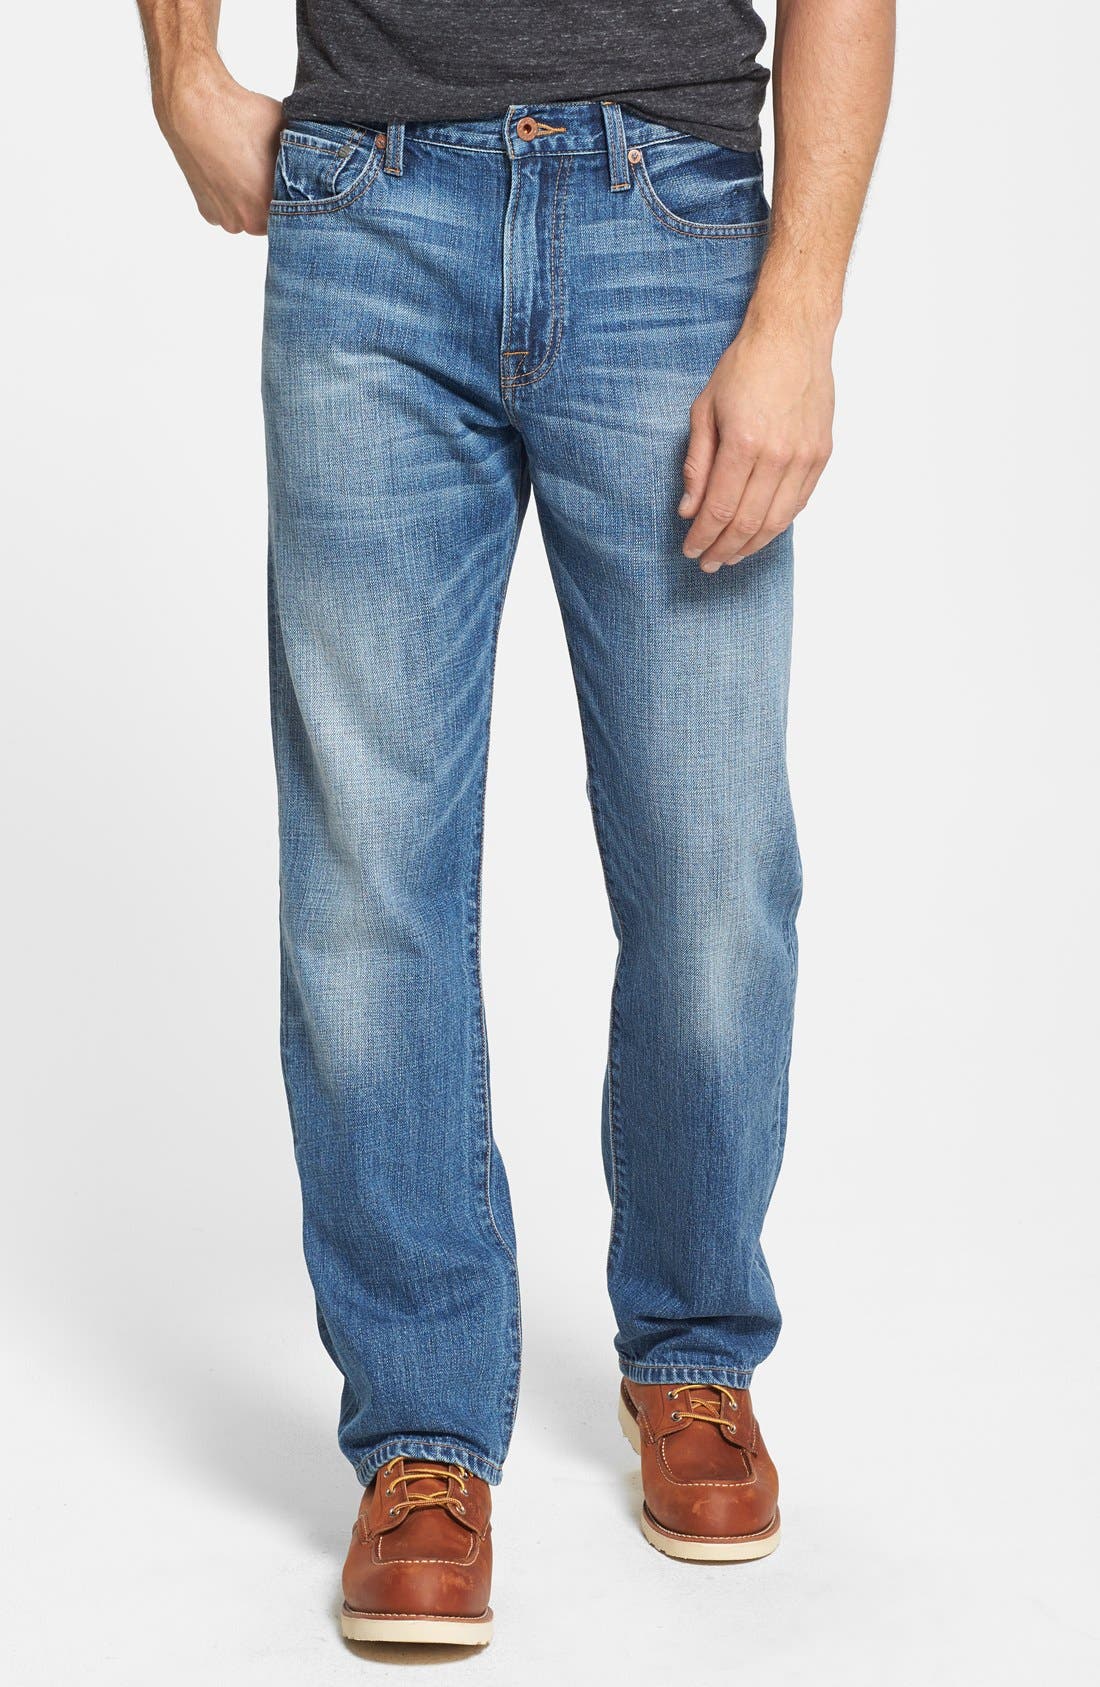 329 classic straight lucky brand jeans